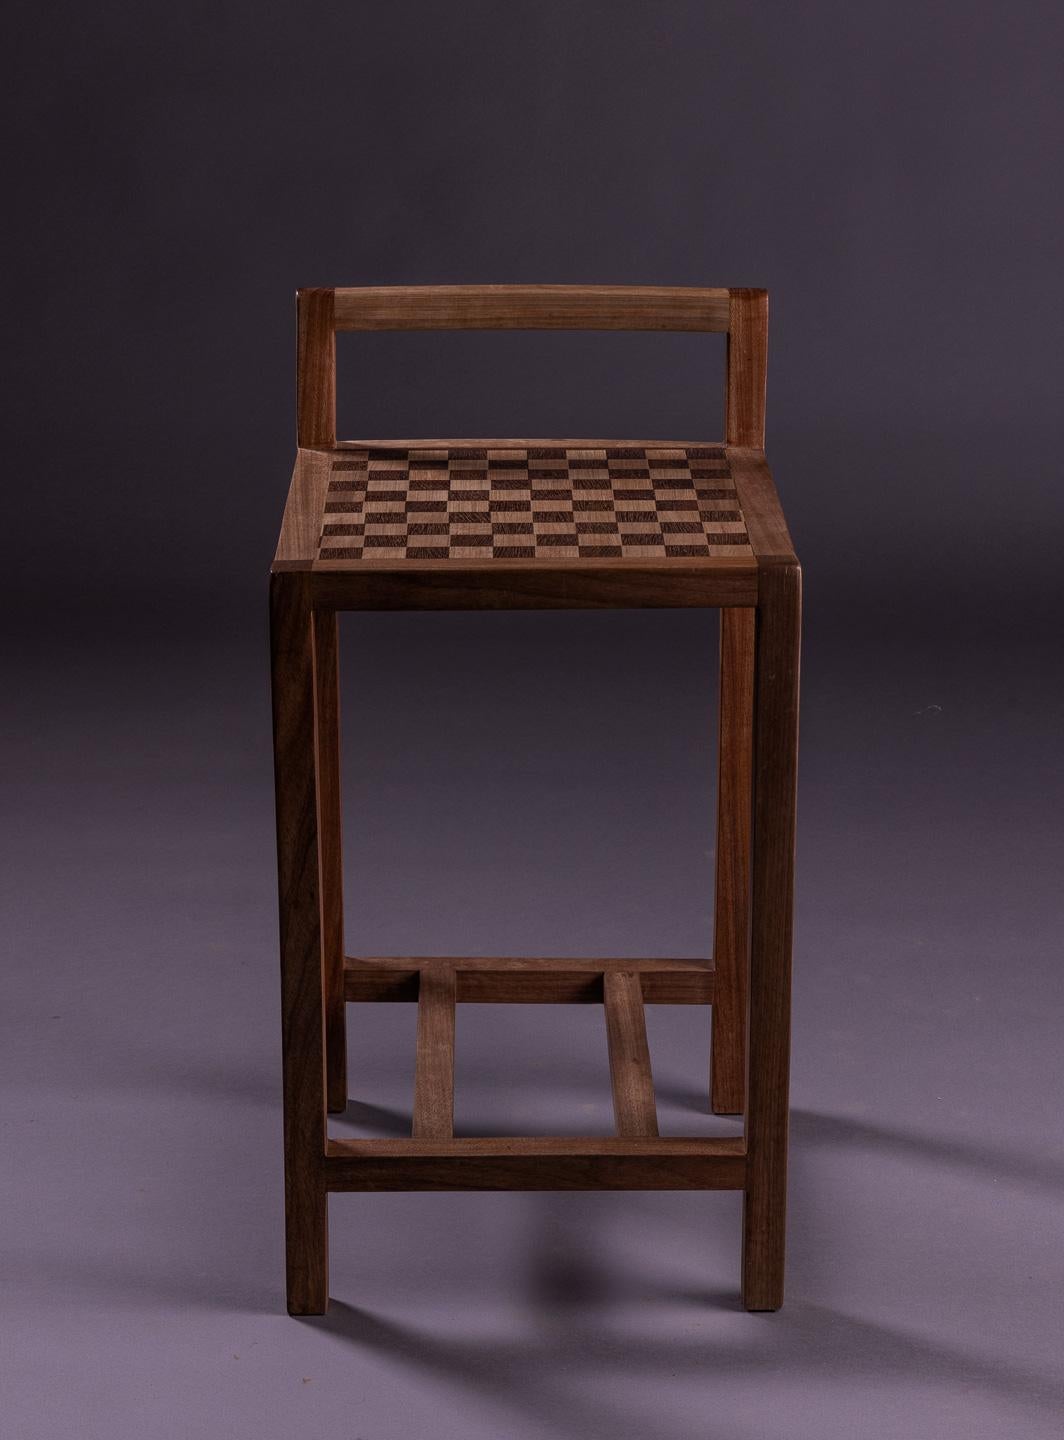 The charming Jojo stool features a checkered marquetry seat, skillfully crafted with the fine woods Jequitibá and Sucupira. Its sturdy structure is also made of high-quality Jequitibá, providing durability and elegance. Beyond its decorative